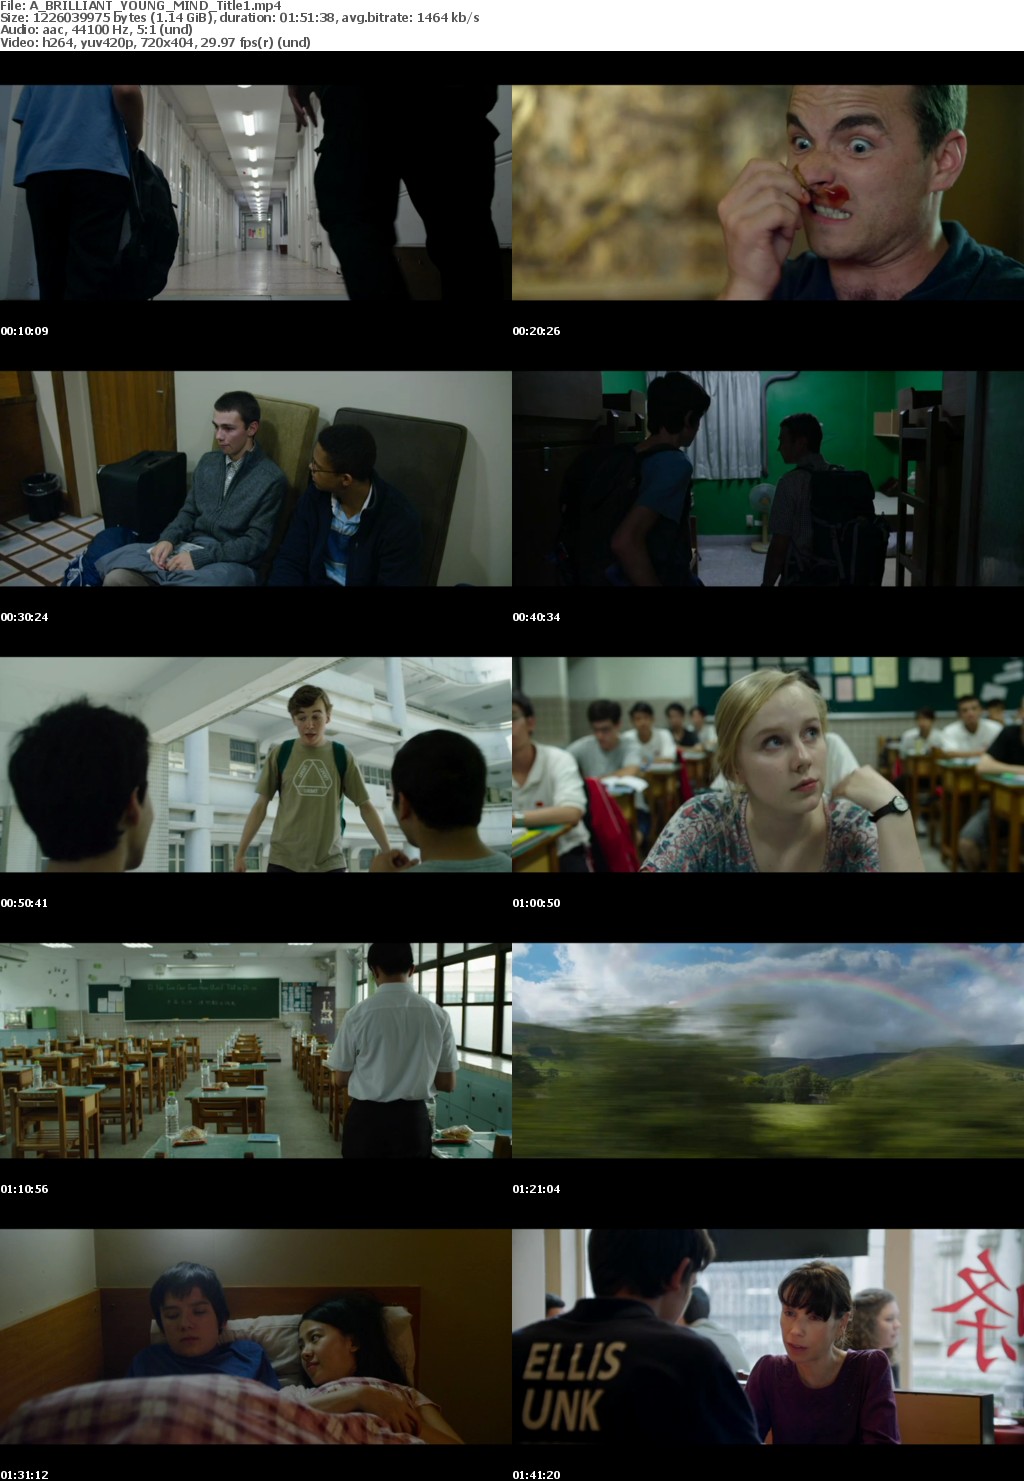 A Brilliant Young Mind (2014) 480p Dvd-Rip x264 AAC-DSD